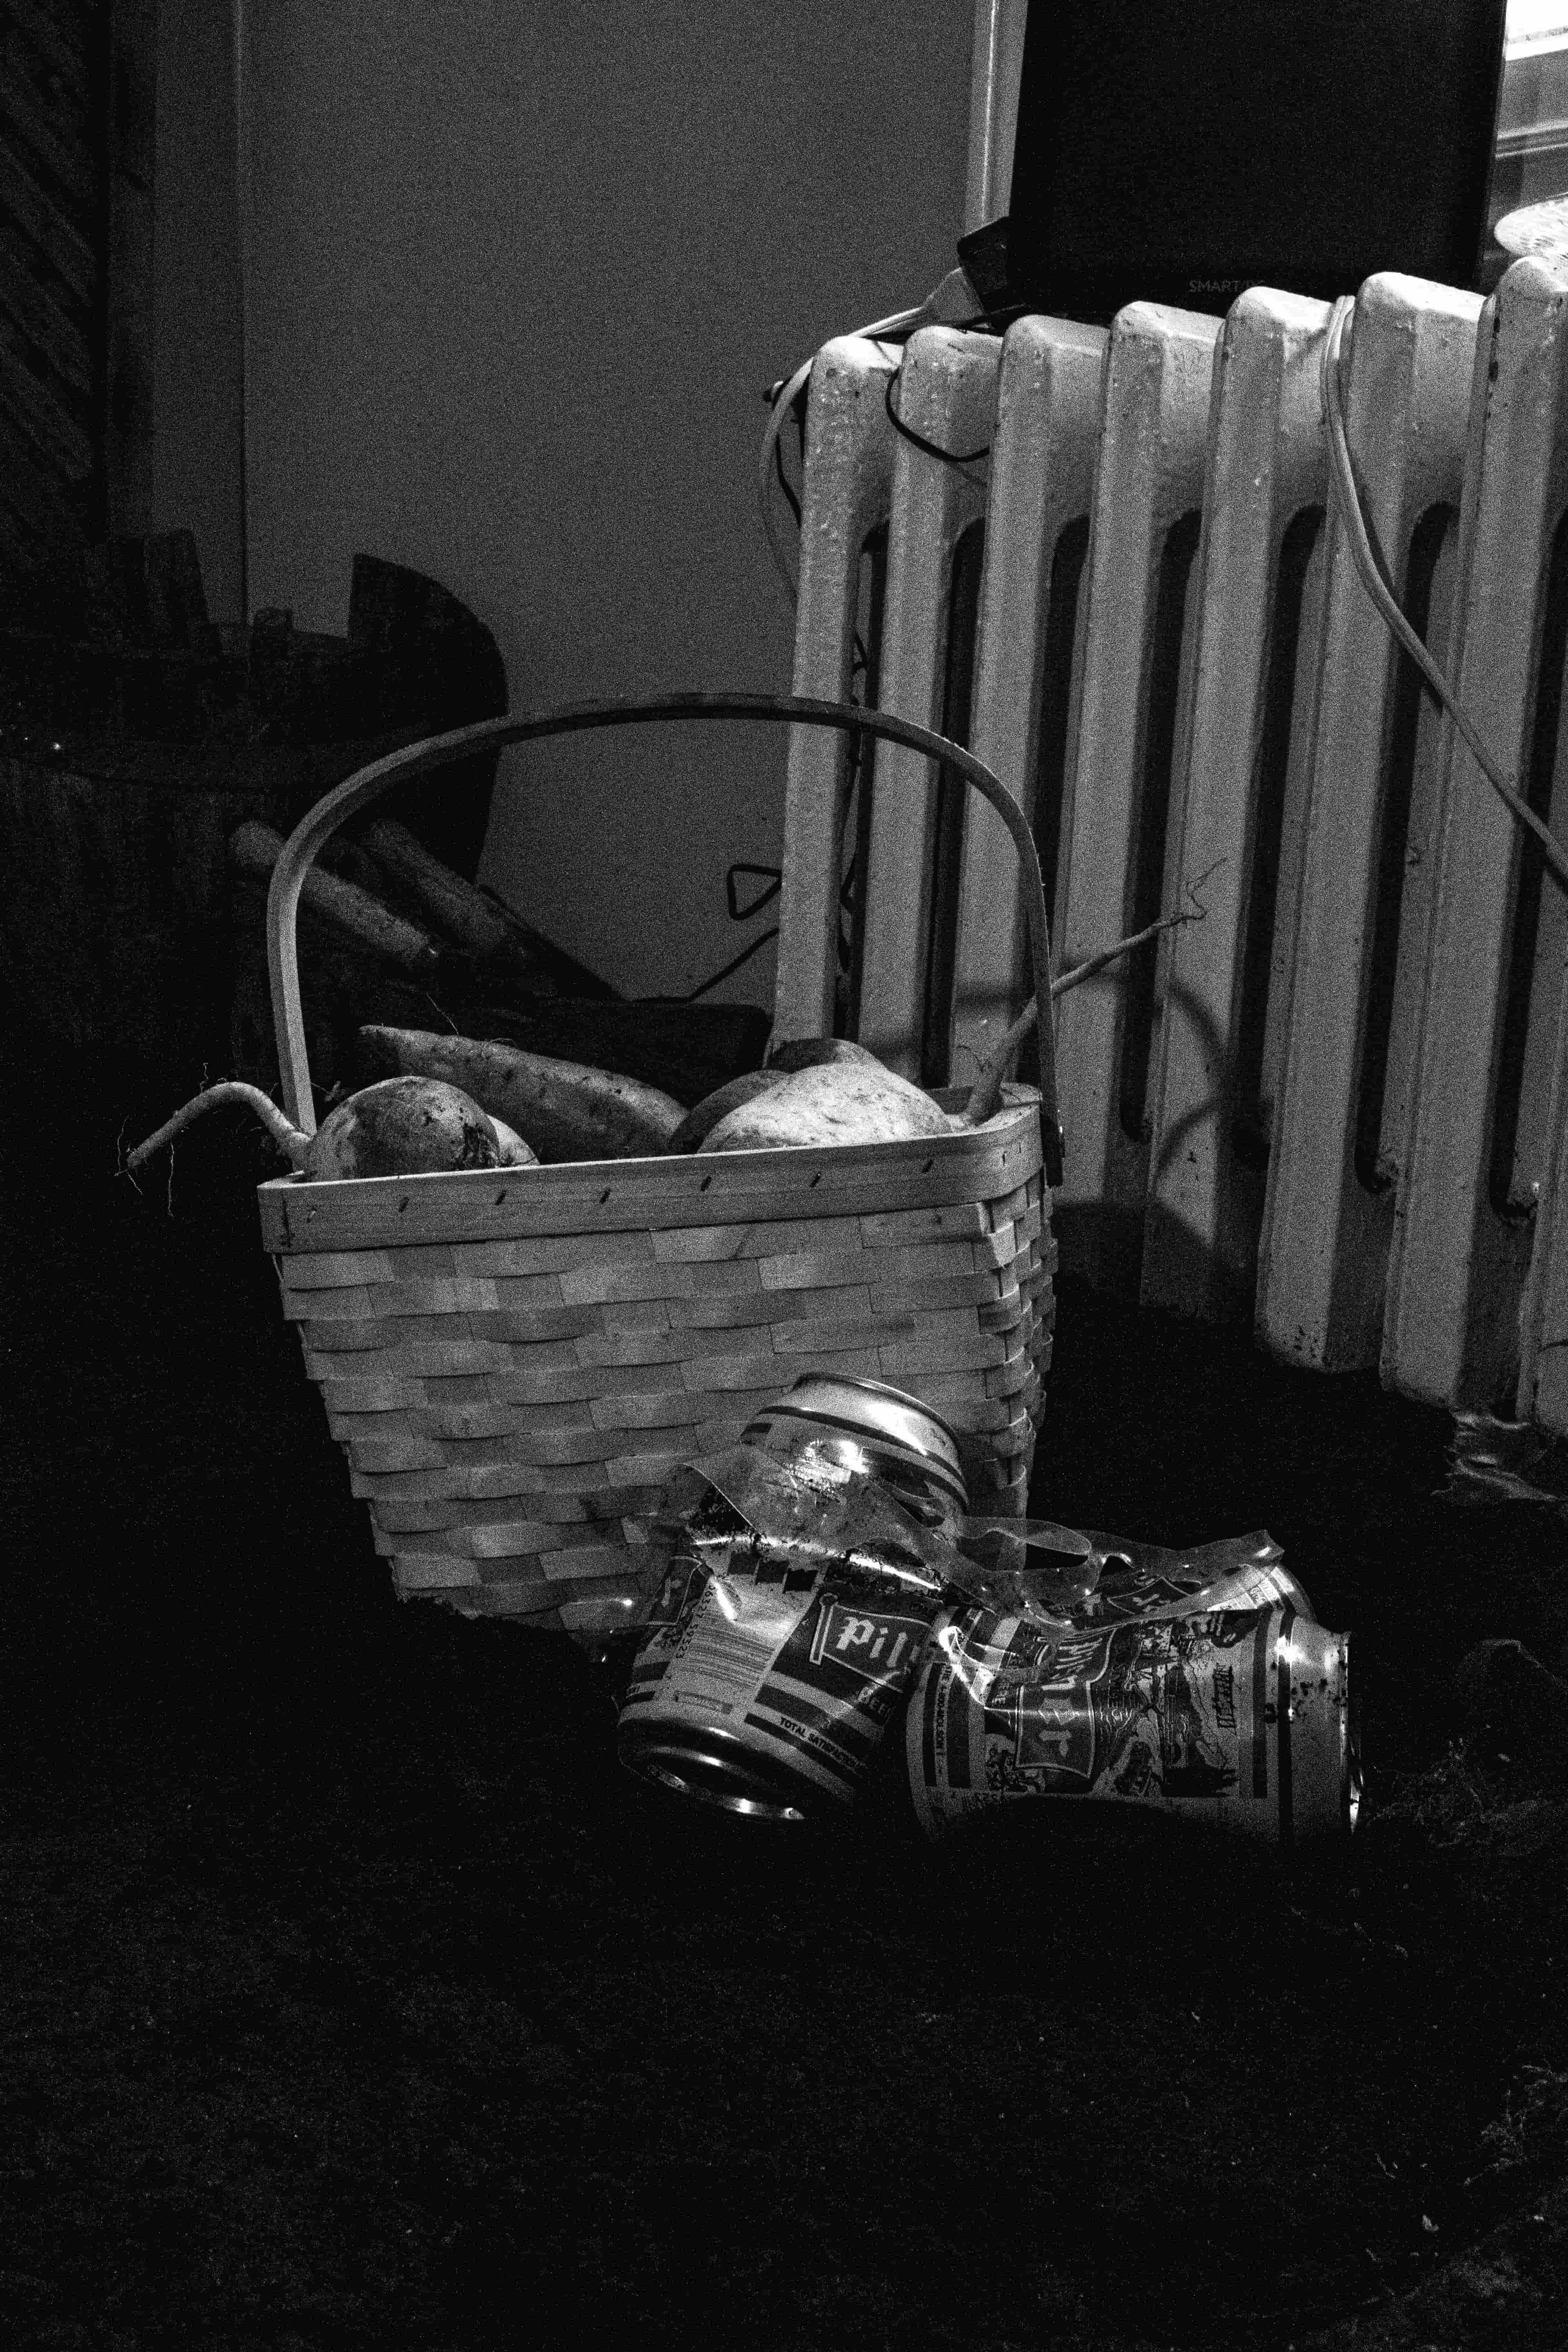 Produce from the farm sits in a wicker basket, surrounded by beer cans in the living room garden